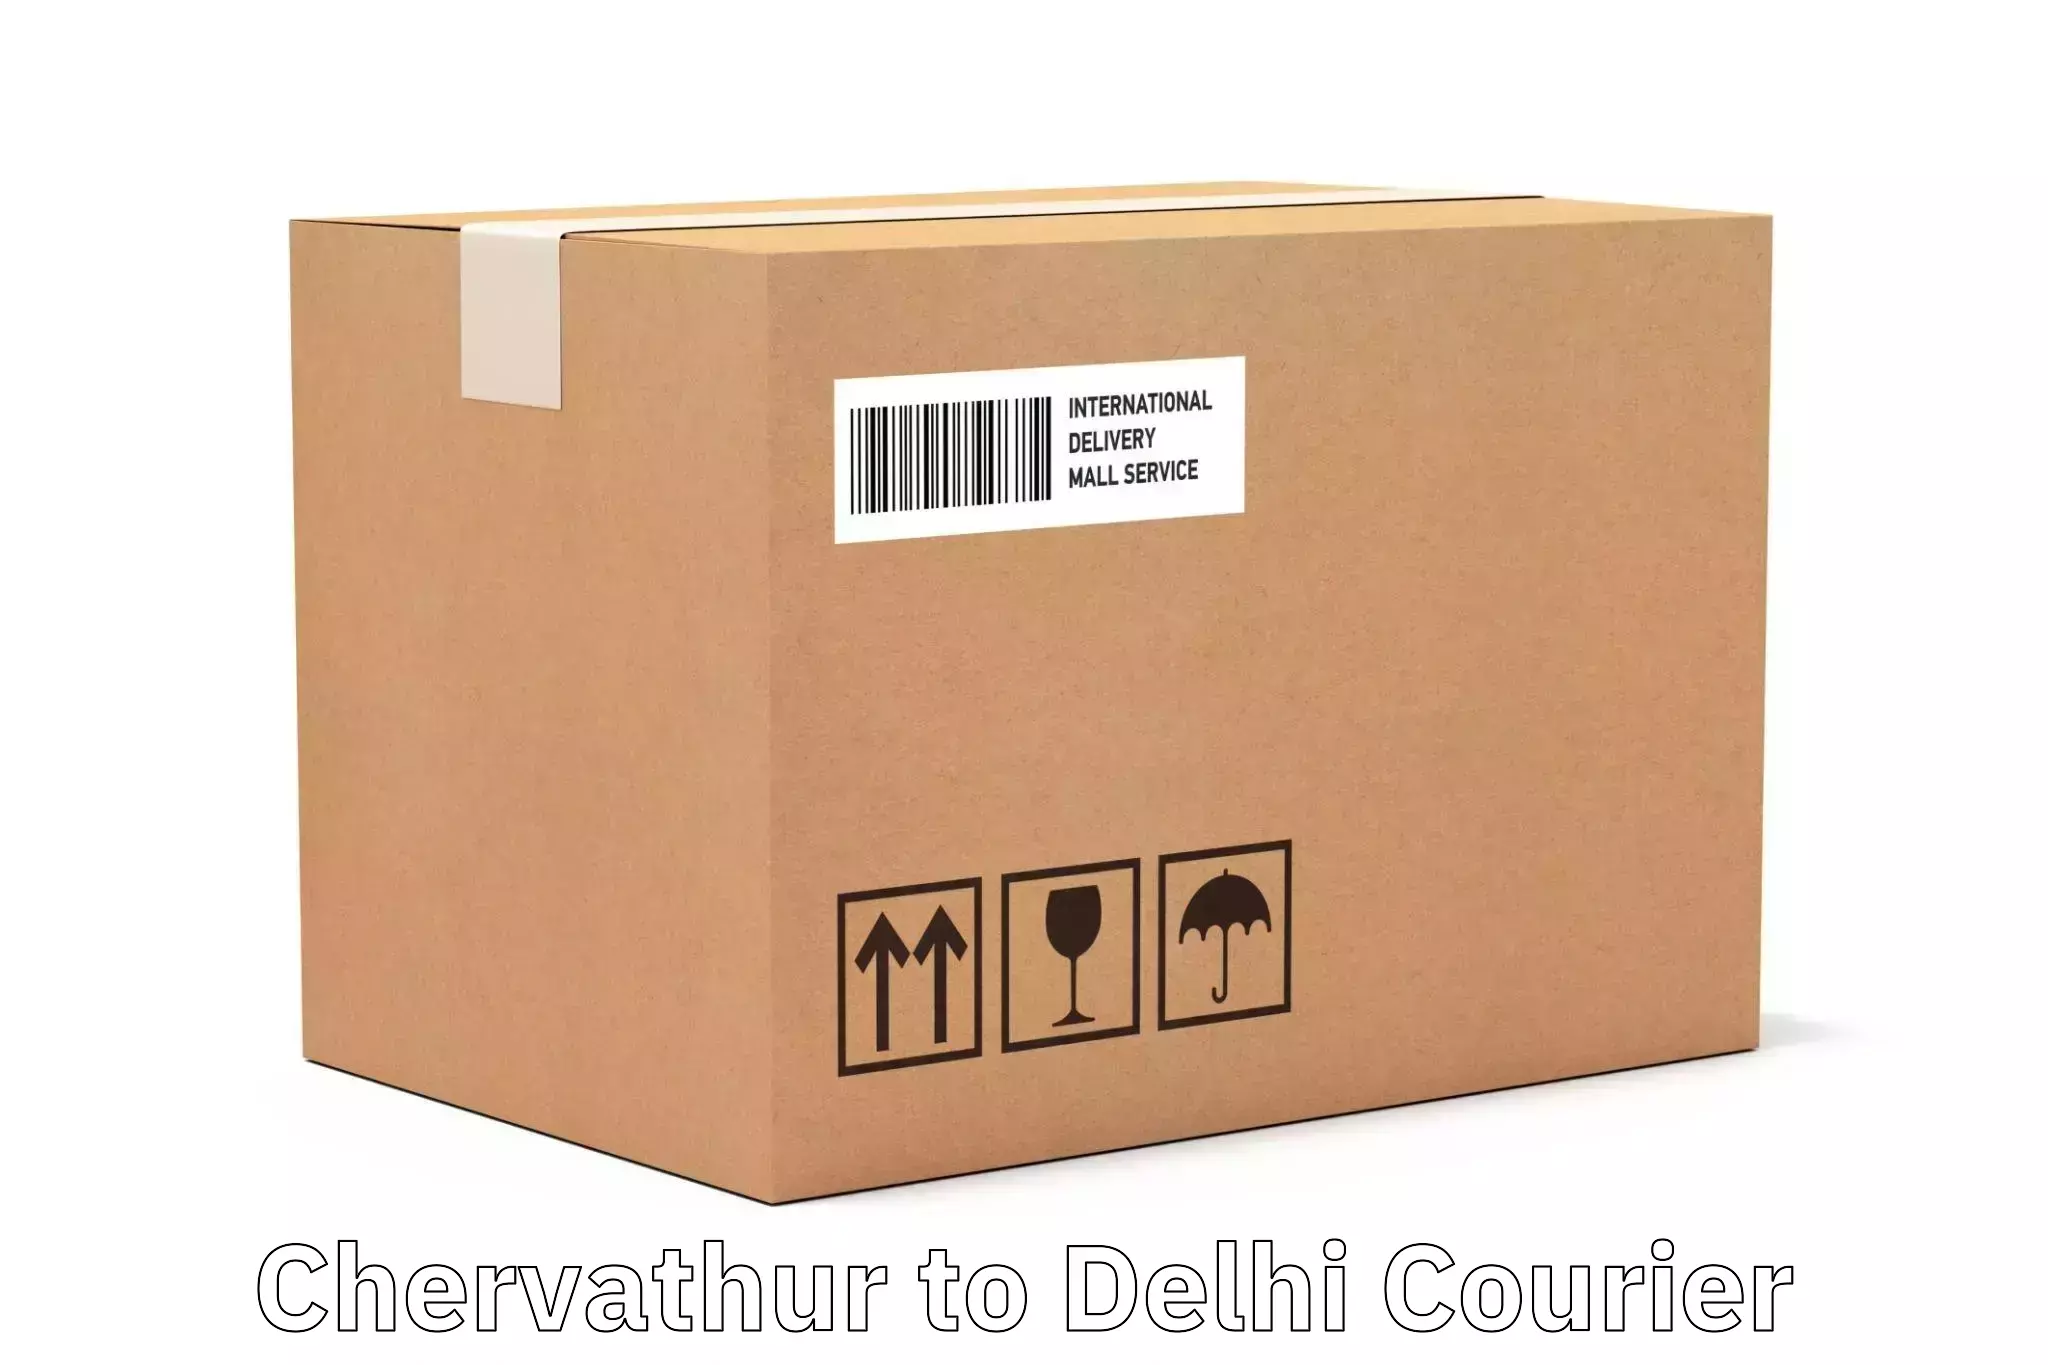 Fast shipping solutions Chervathur to Lodhi Road